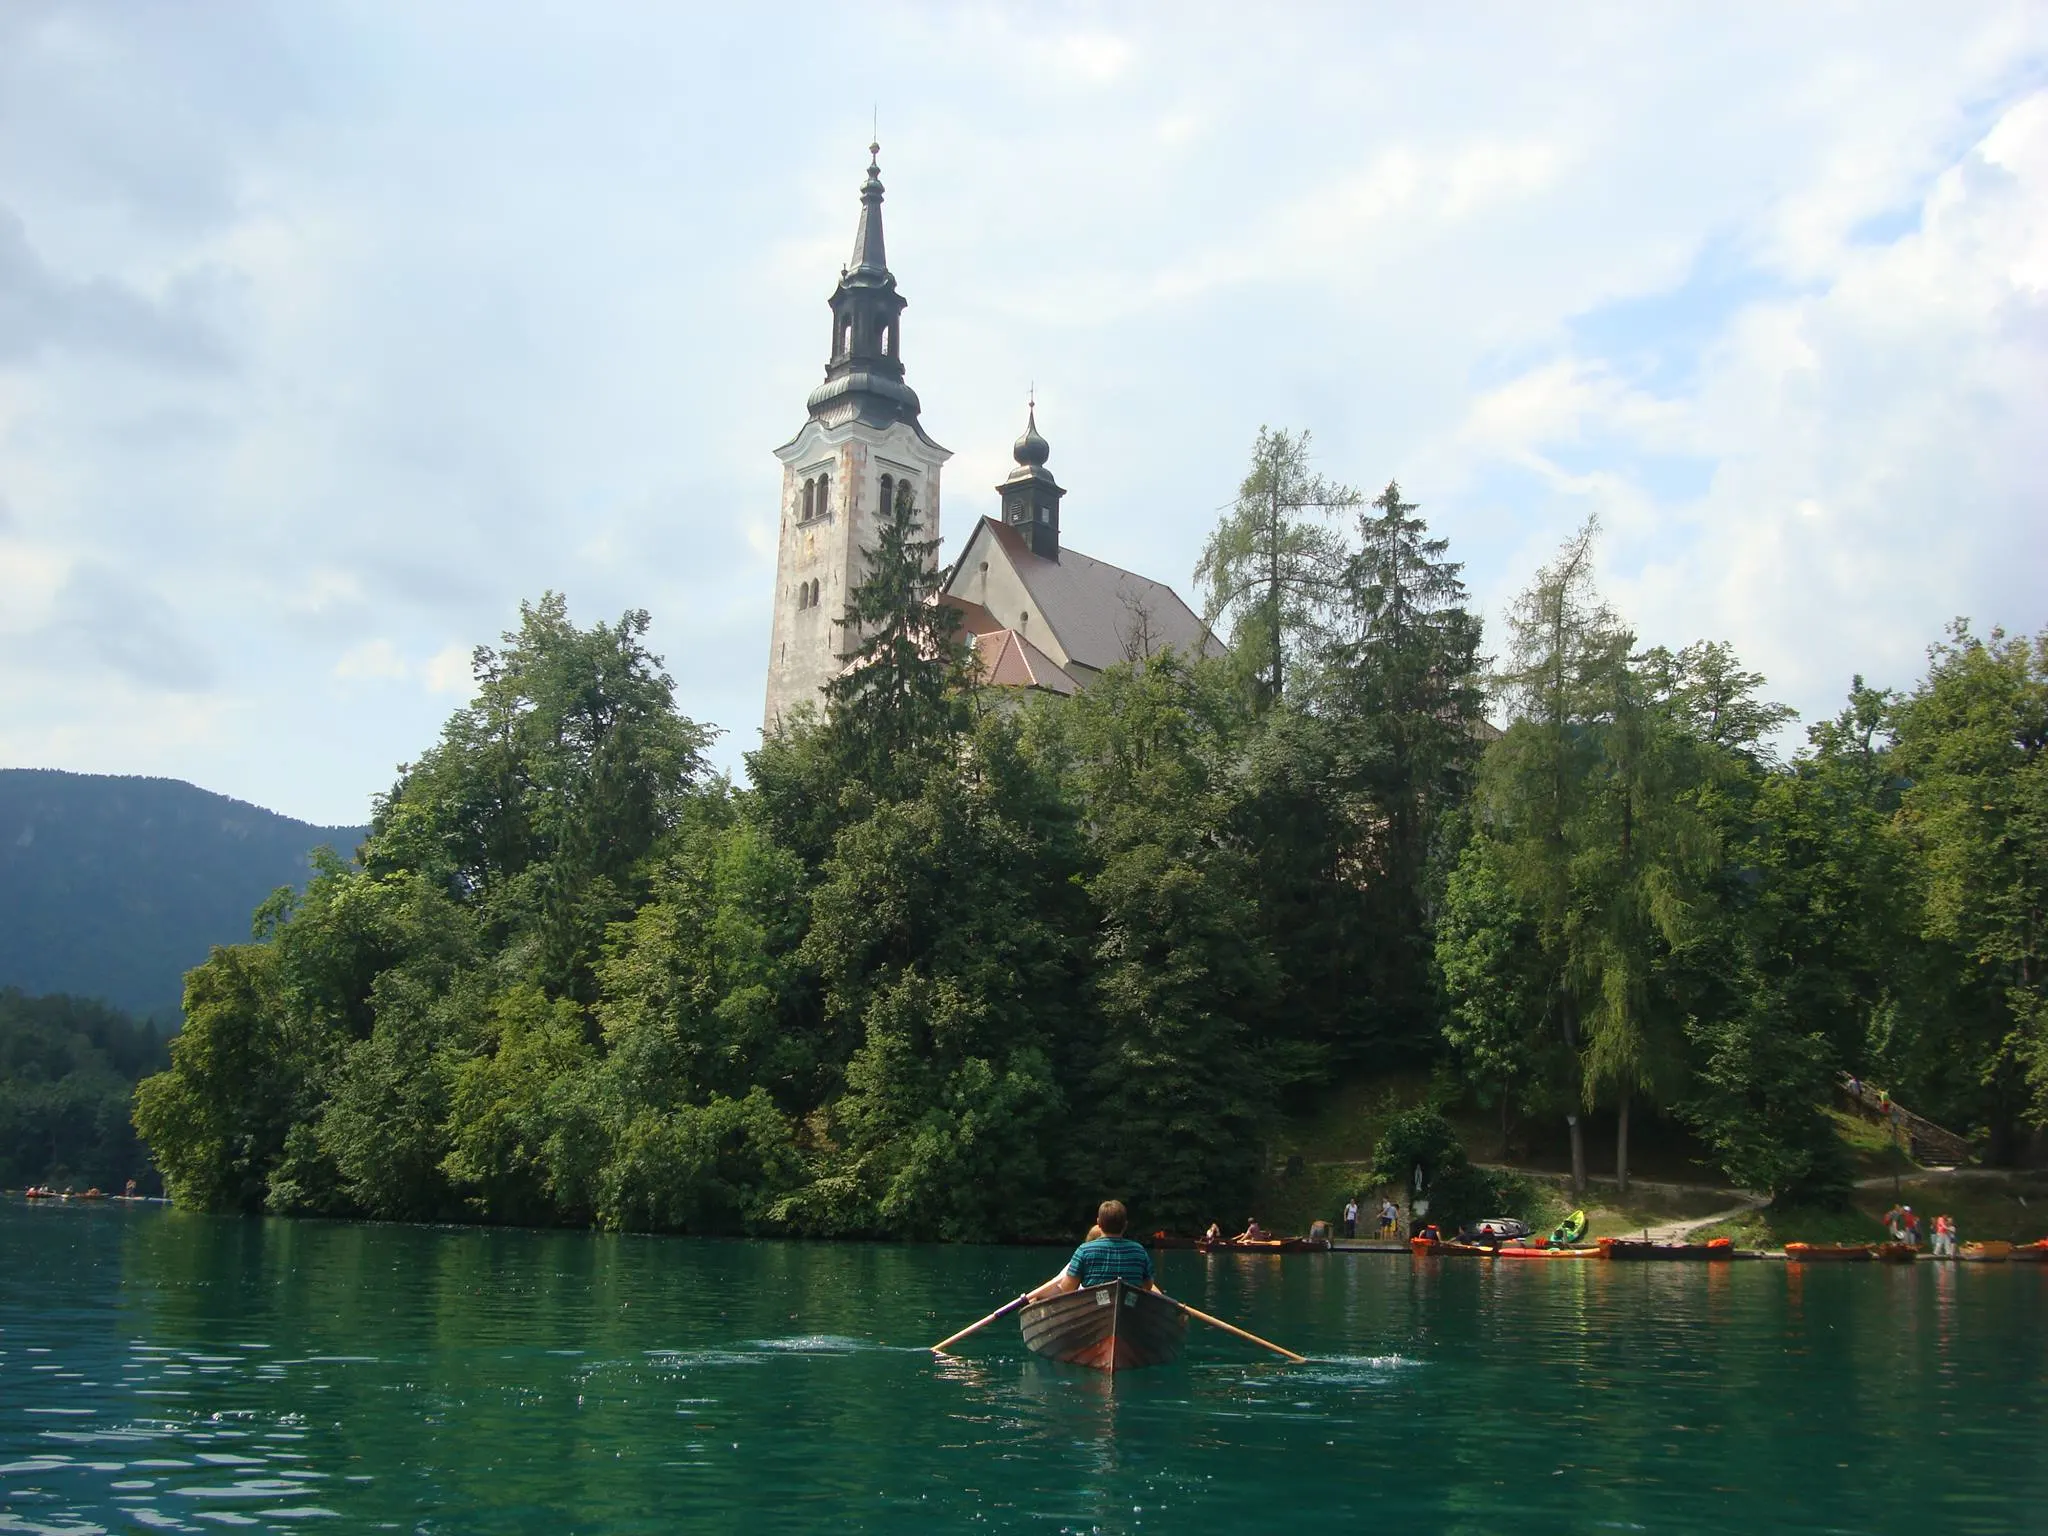 Lake Bled with the island and church